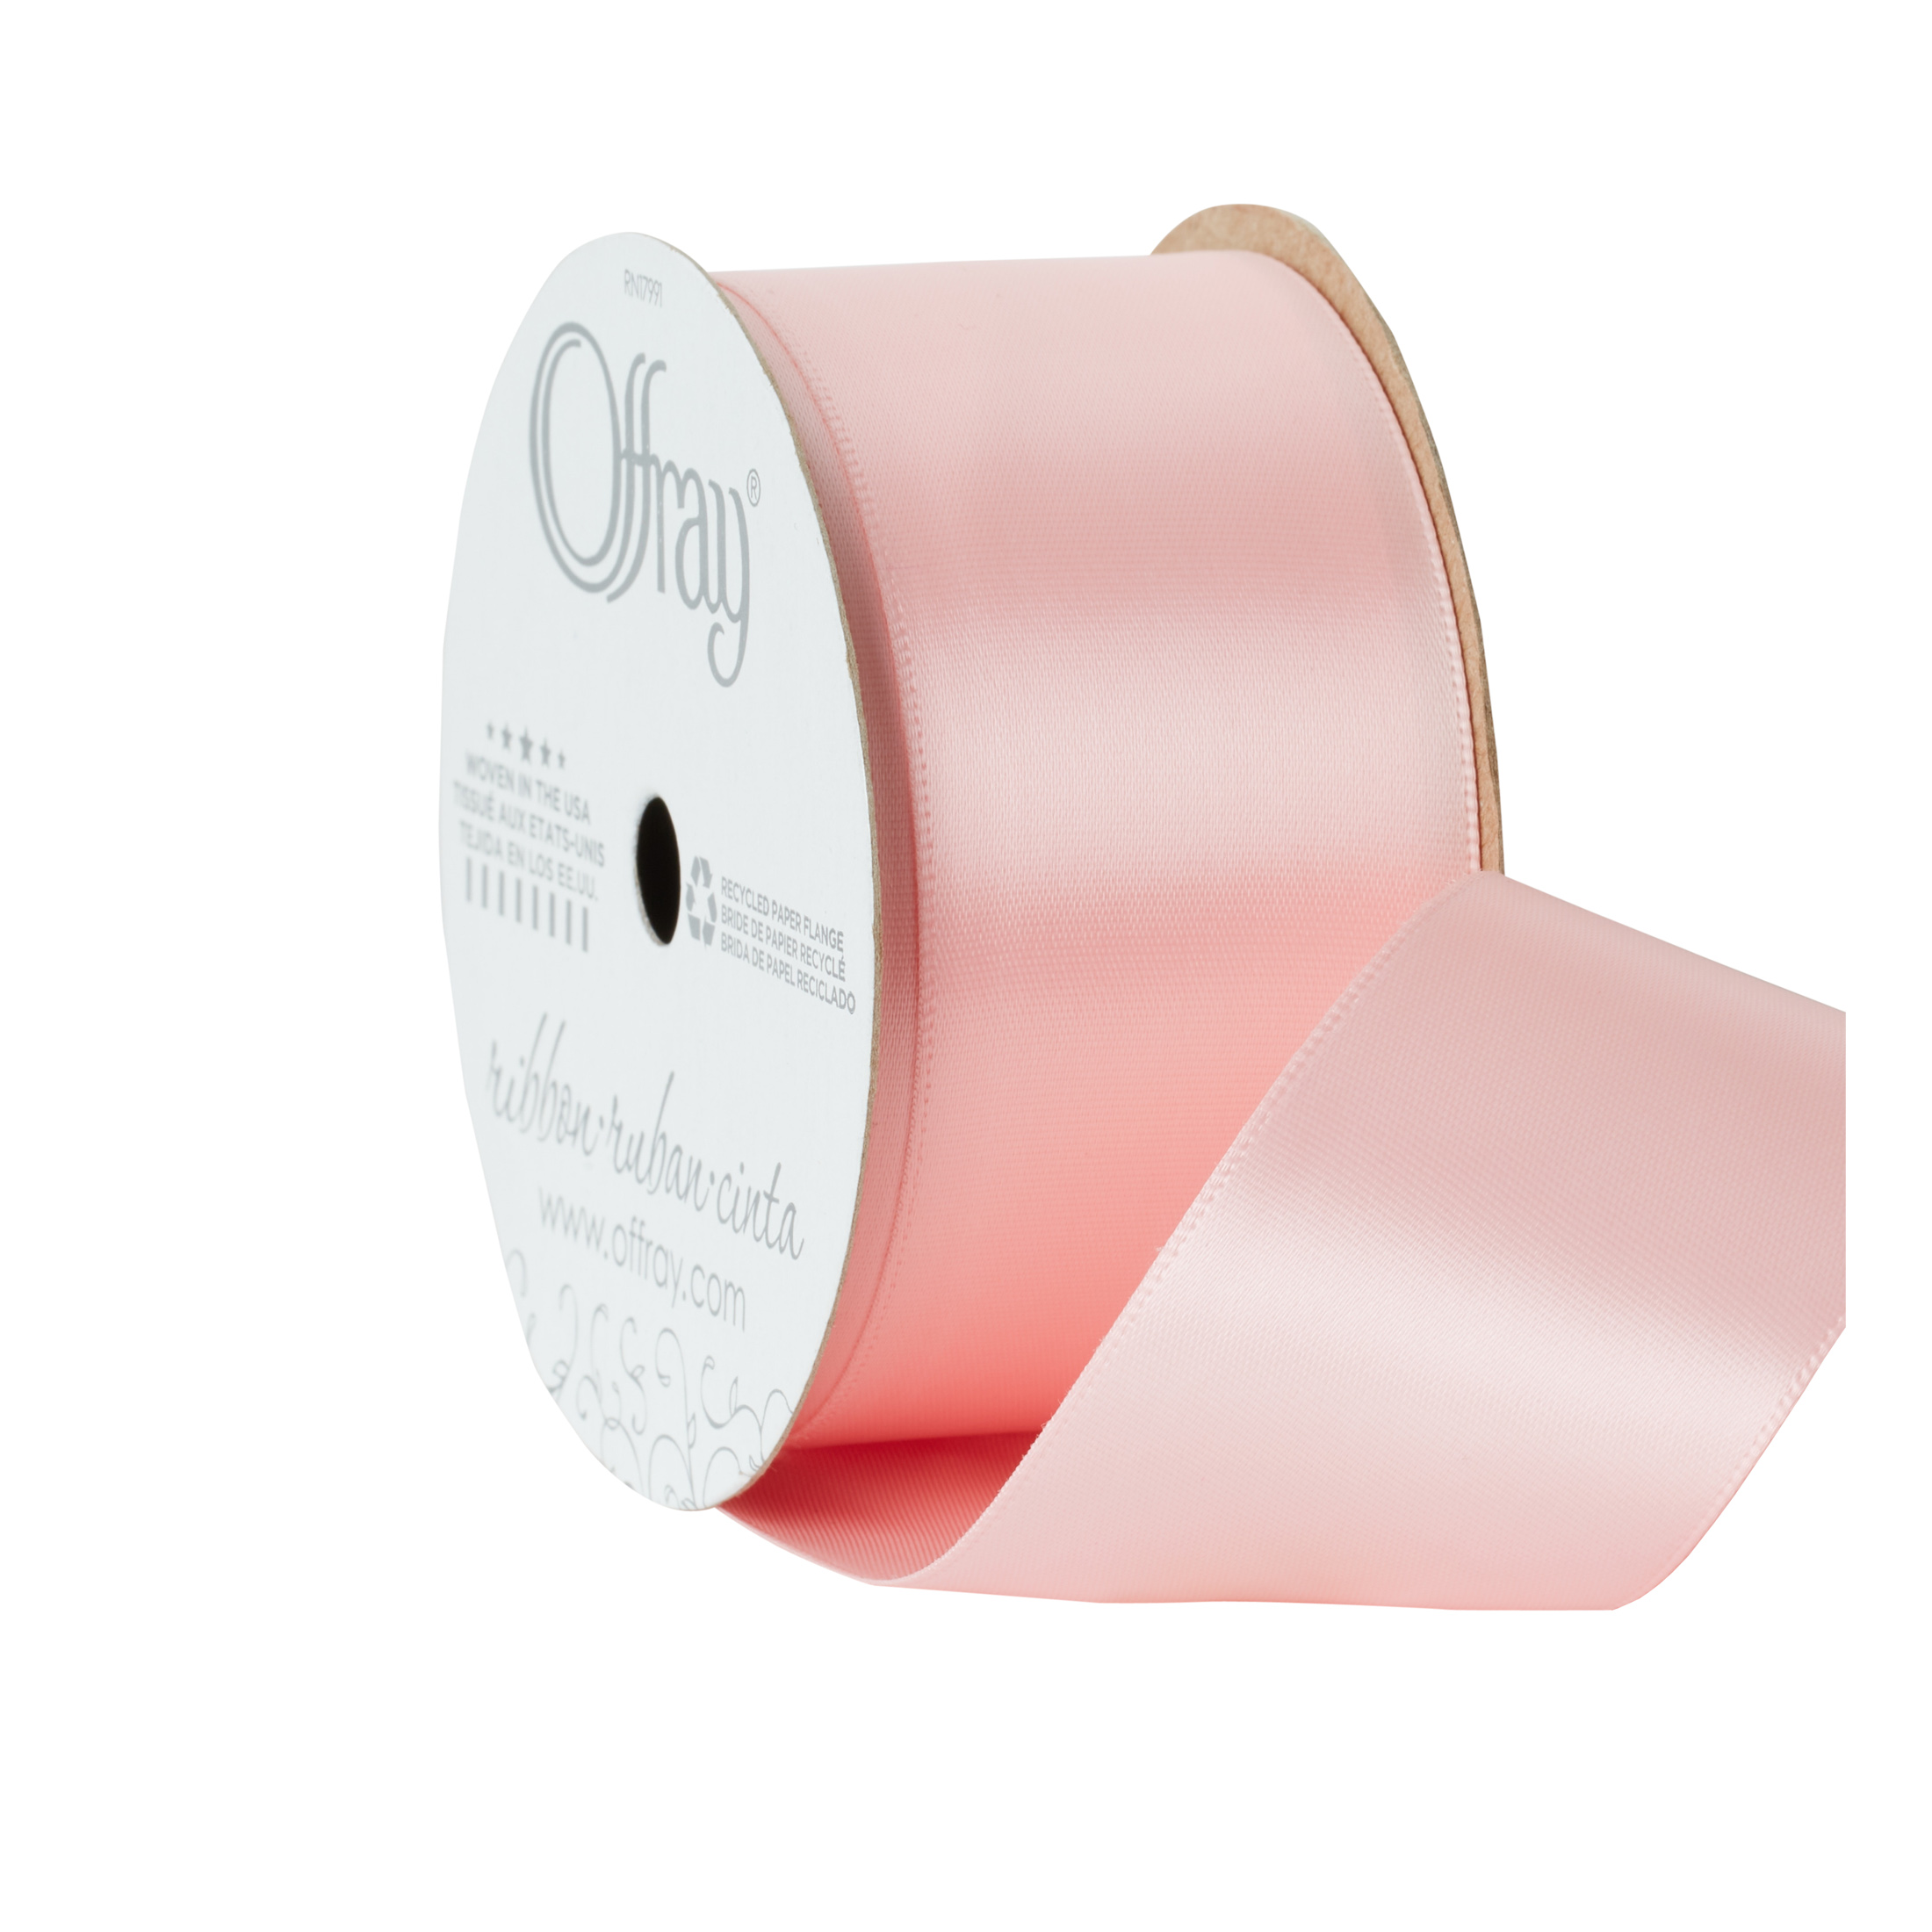 Offray Ribbon, Carnation Pink 1 1/2 inch Single Face Satin Polyester Ribbon, 12 feet - image 2 of 6